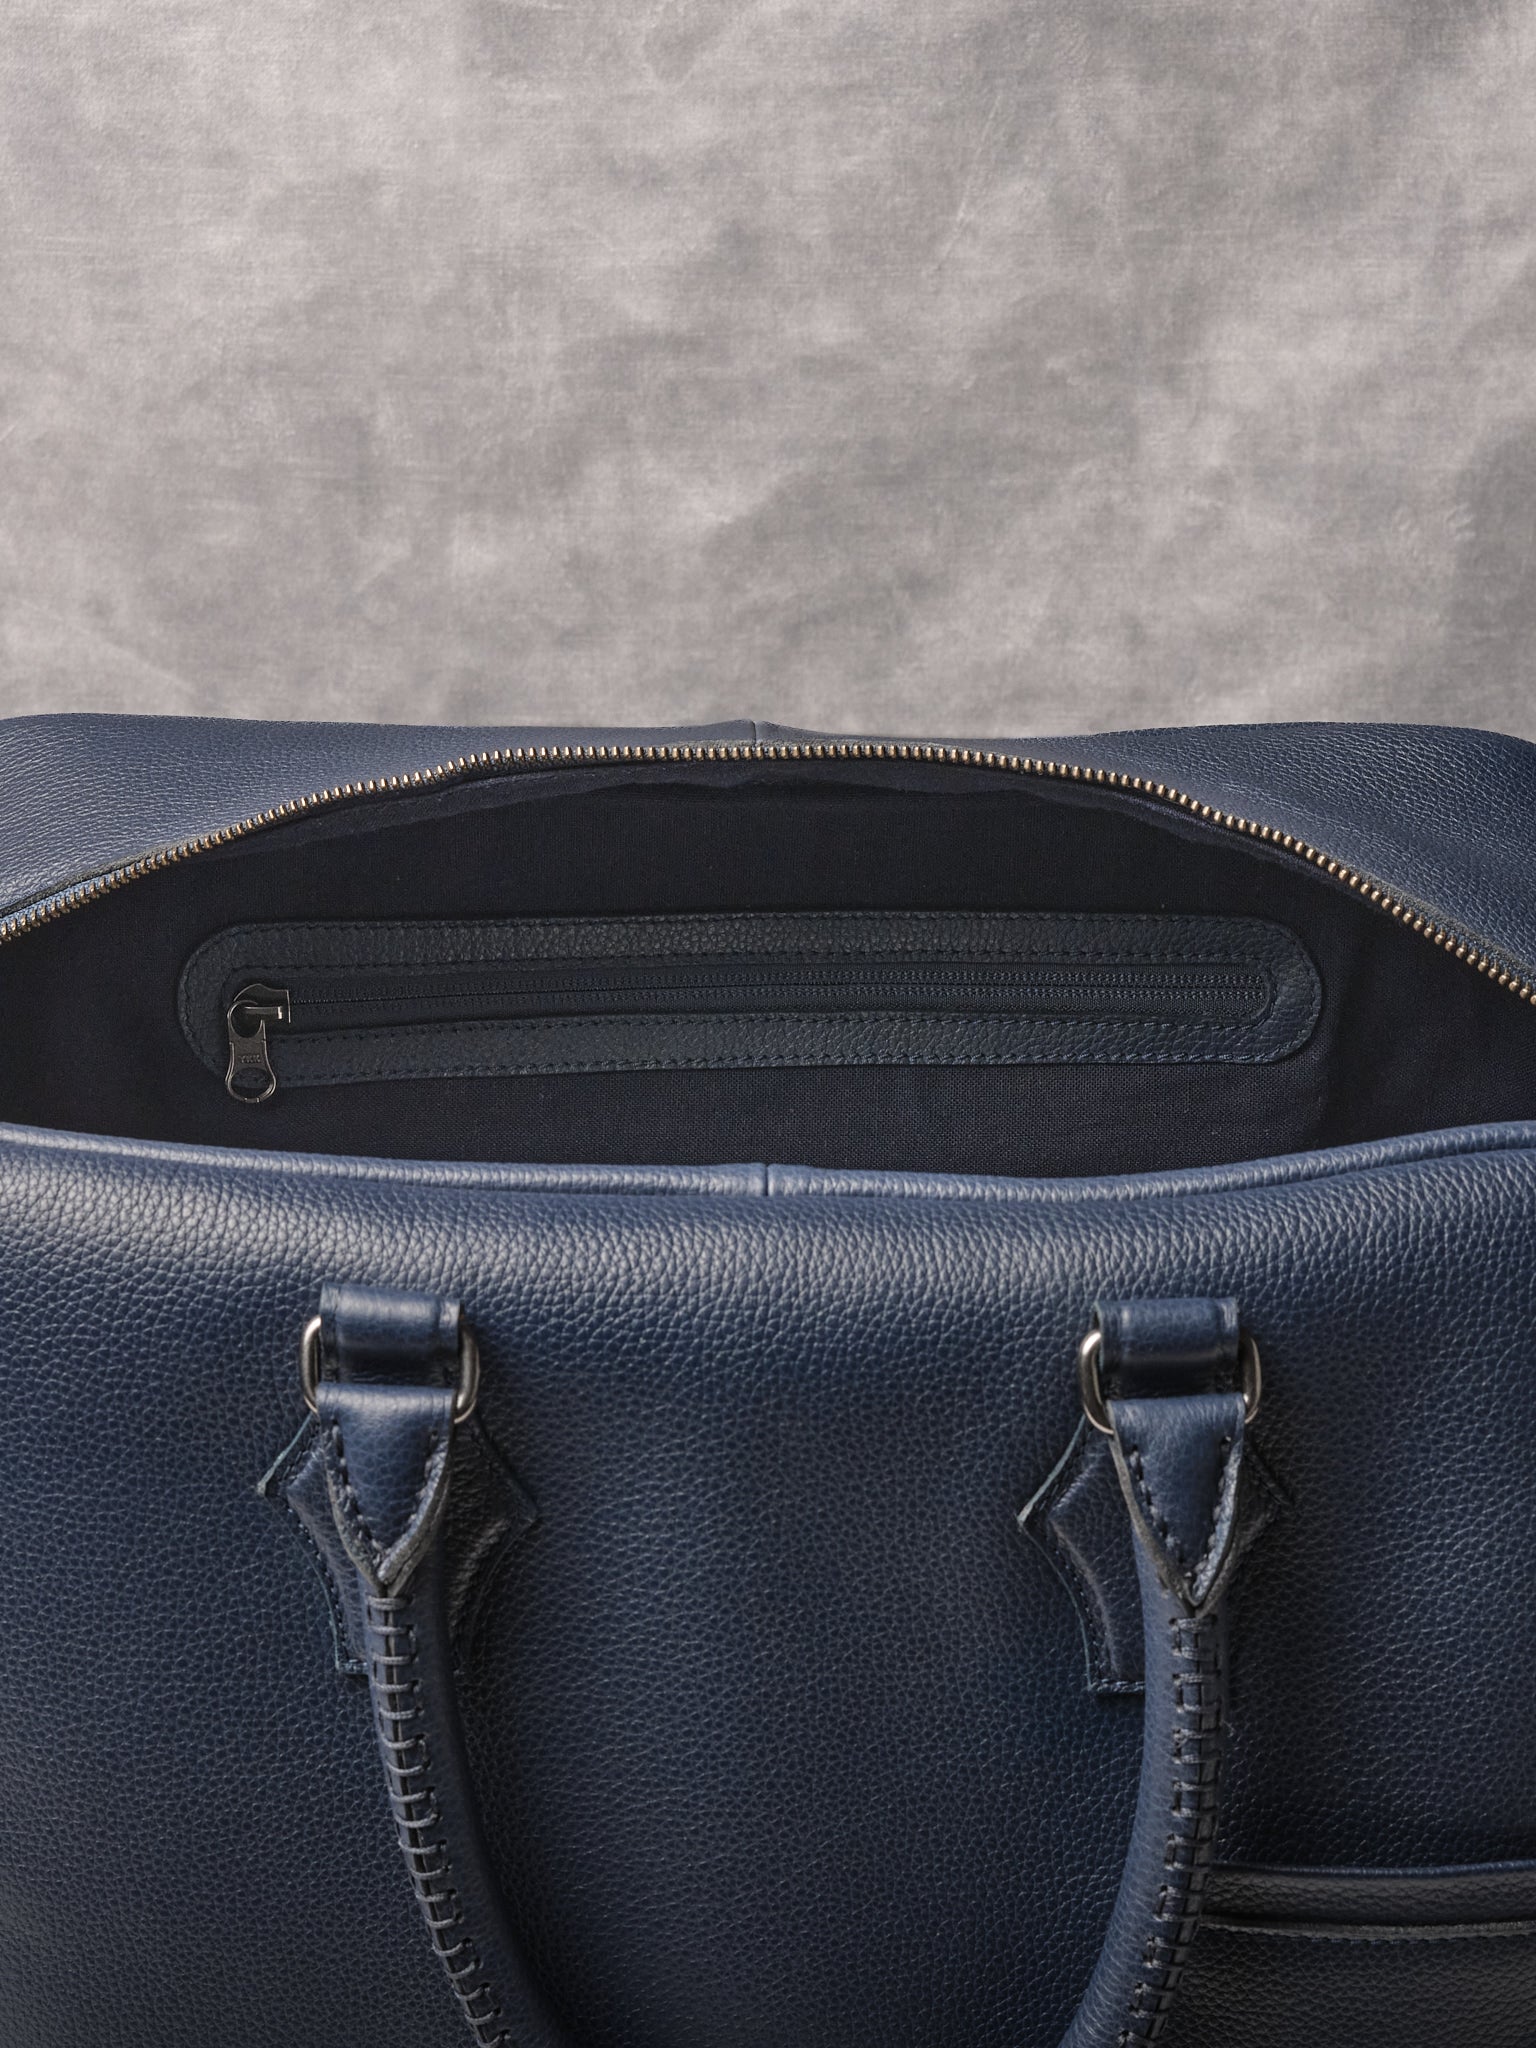 Linen Interior. Custom Duffle Bags Navy by Capra Leather